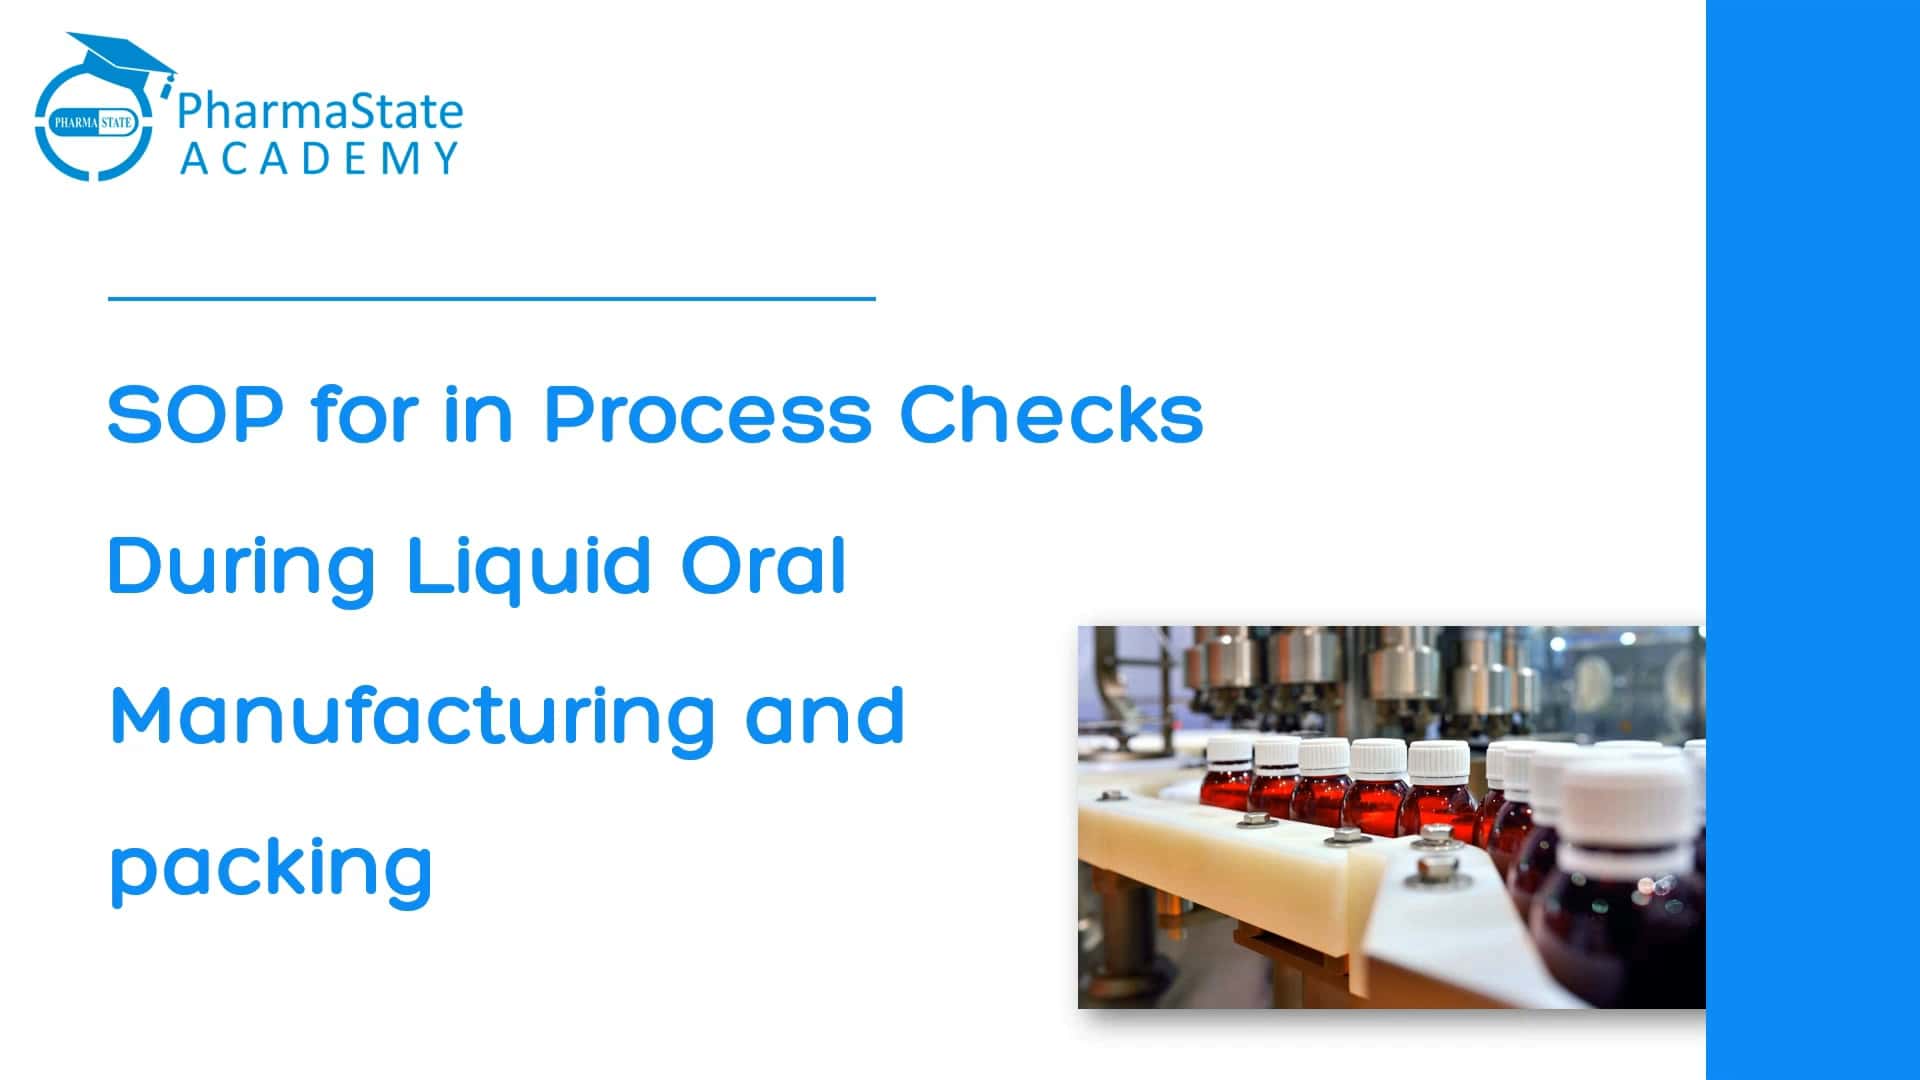 SOP for in Process Checks During Liquid Oral Manufacturing and Packing